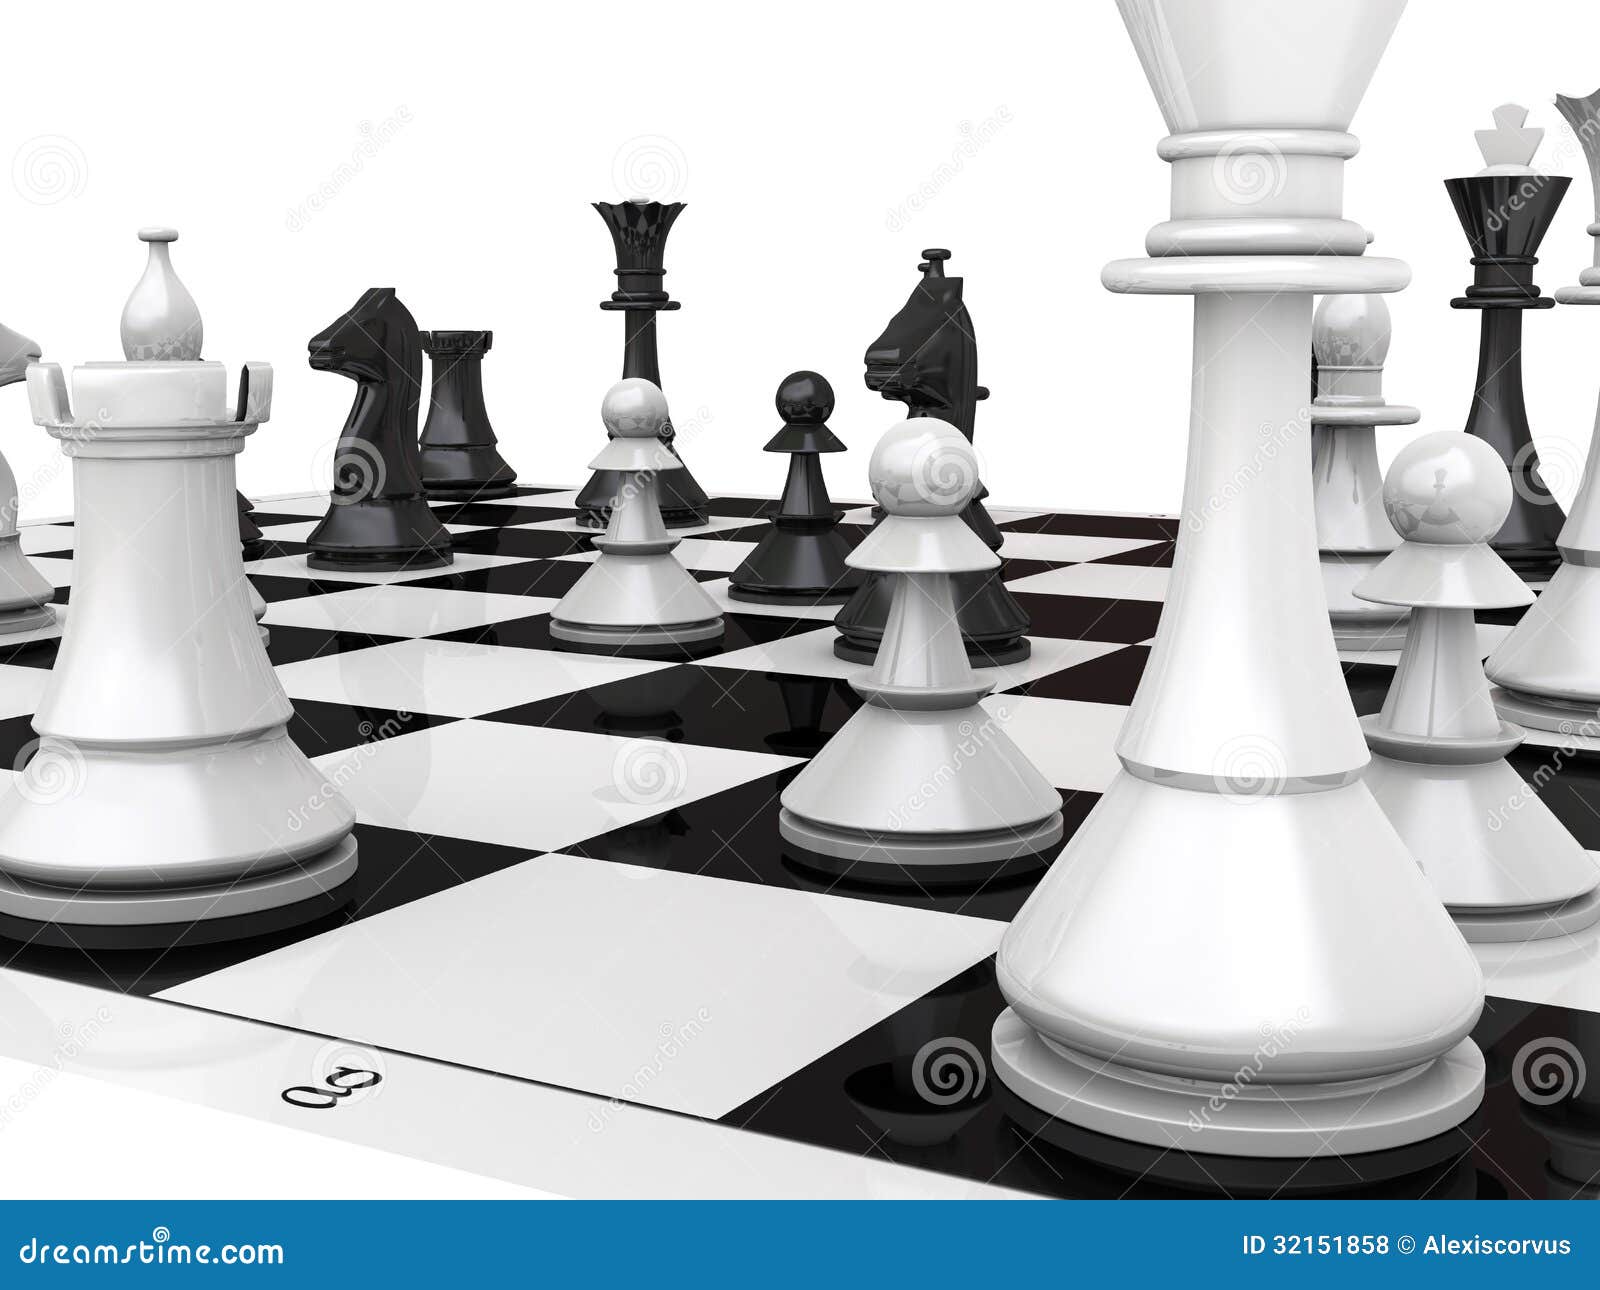 Chess Game Stock Photos, Images and Backgrounds for Free Download